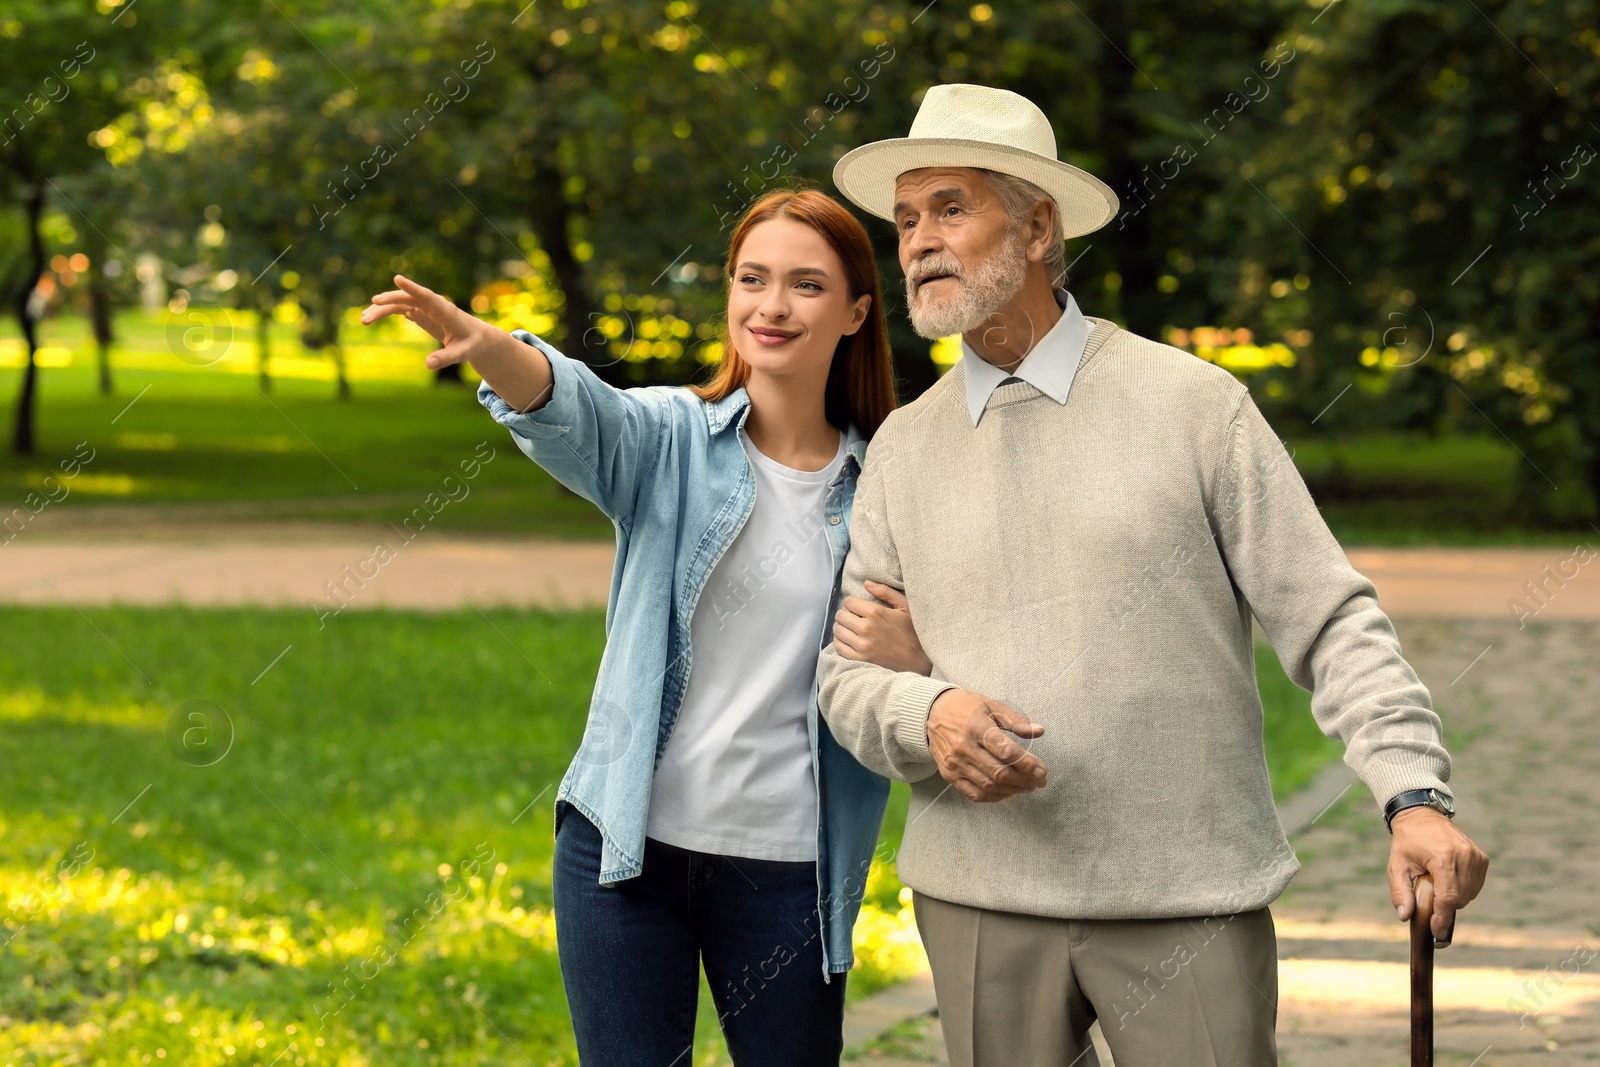 Photo of Senior man with walking cane and young woman in park